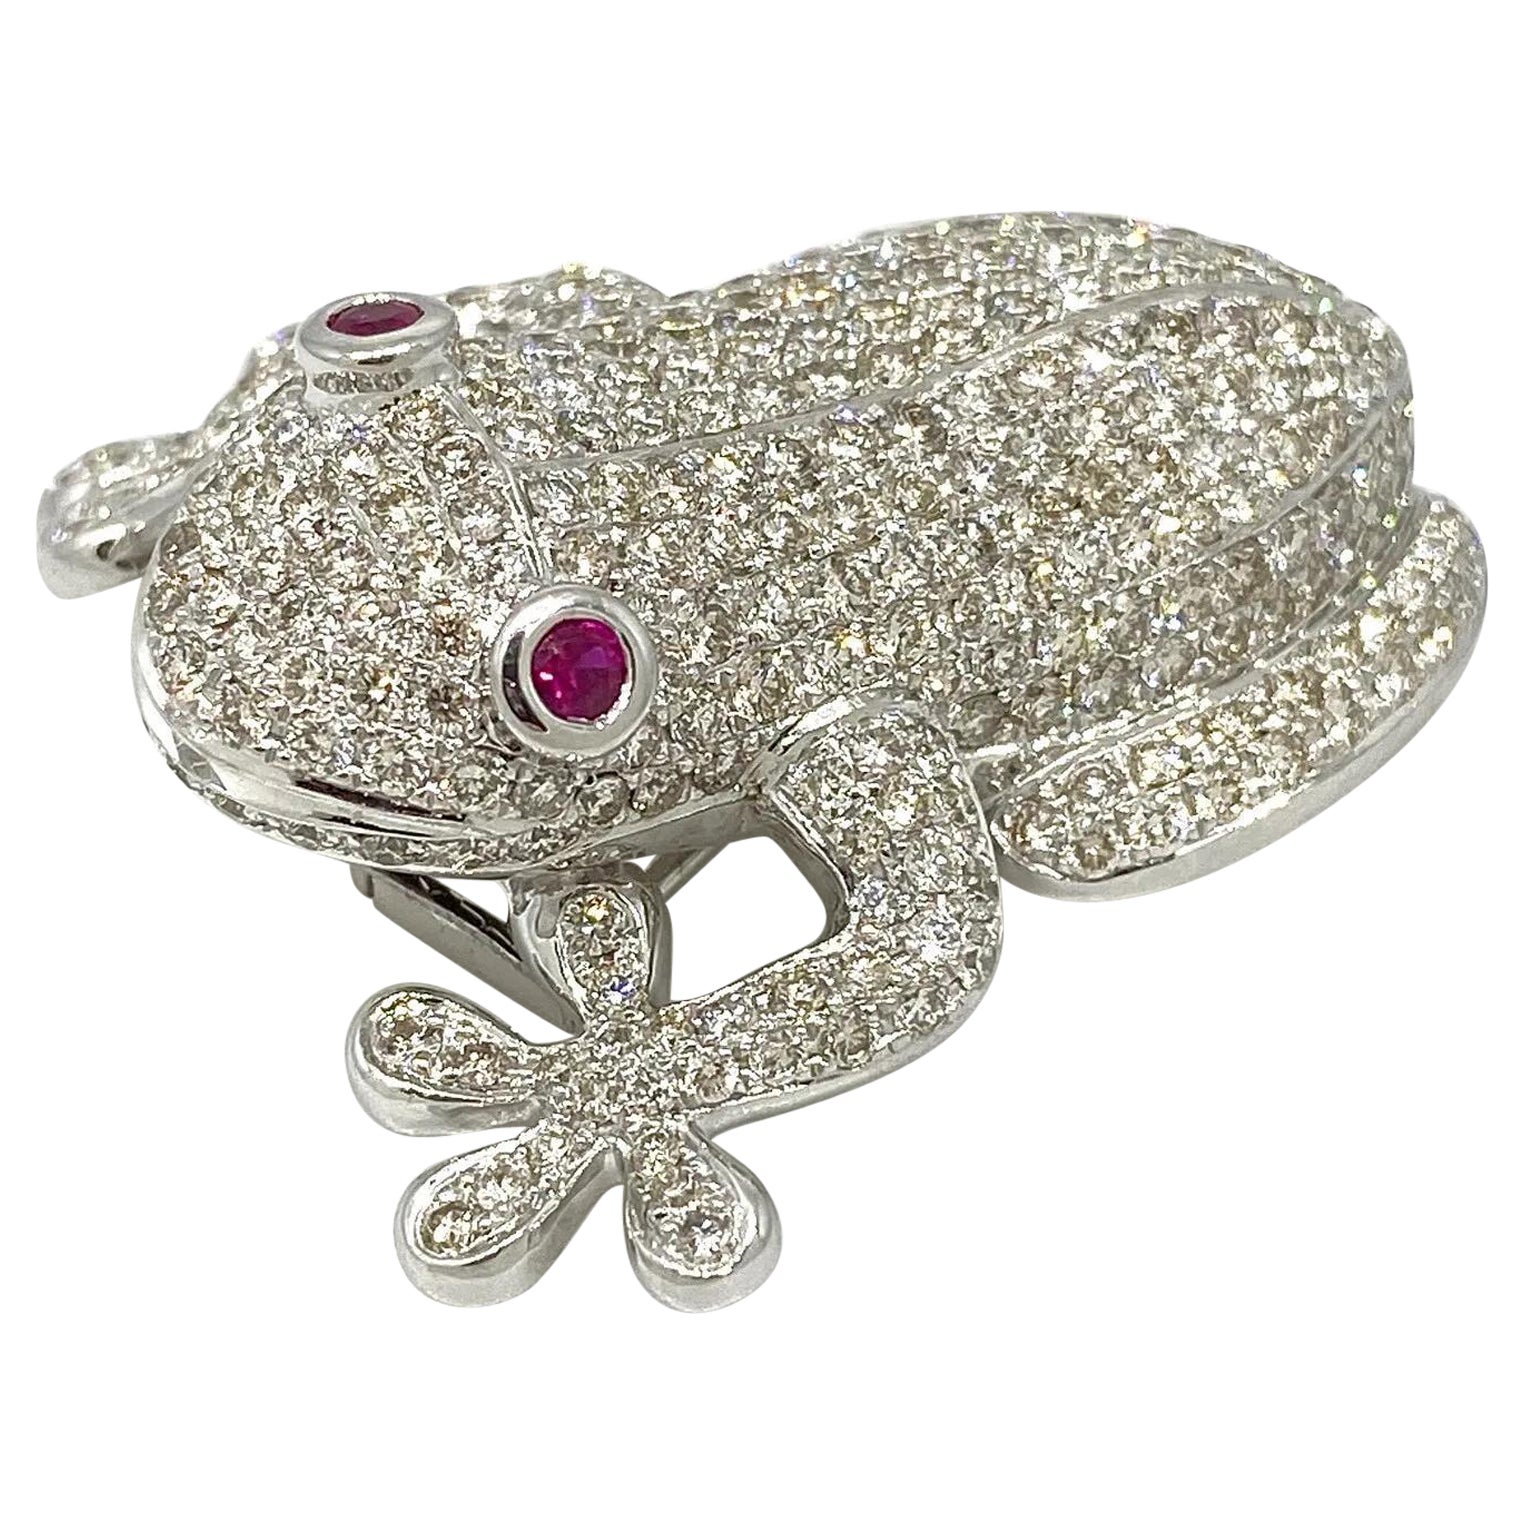 Diamond Pave Tree Frog Pin Brooch in 18k White Gold